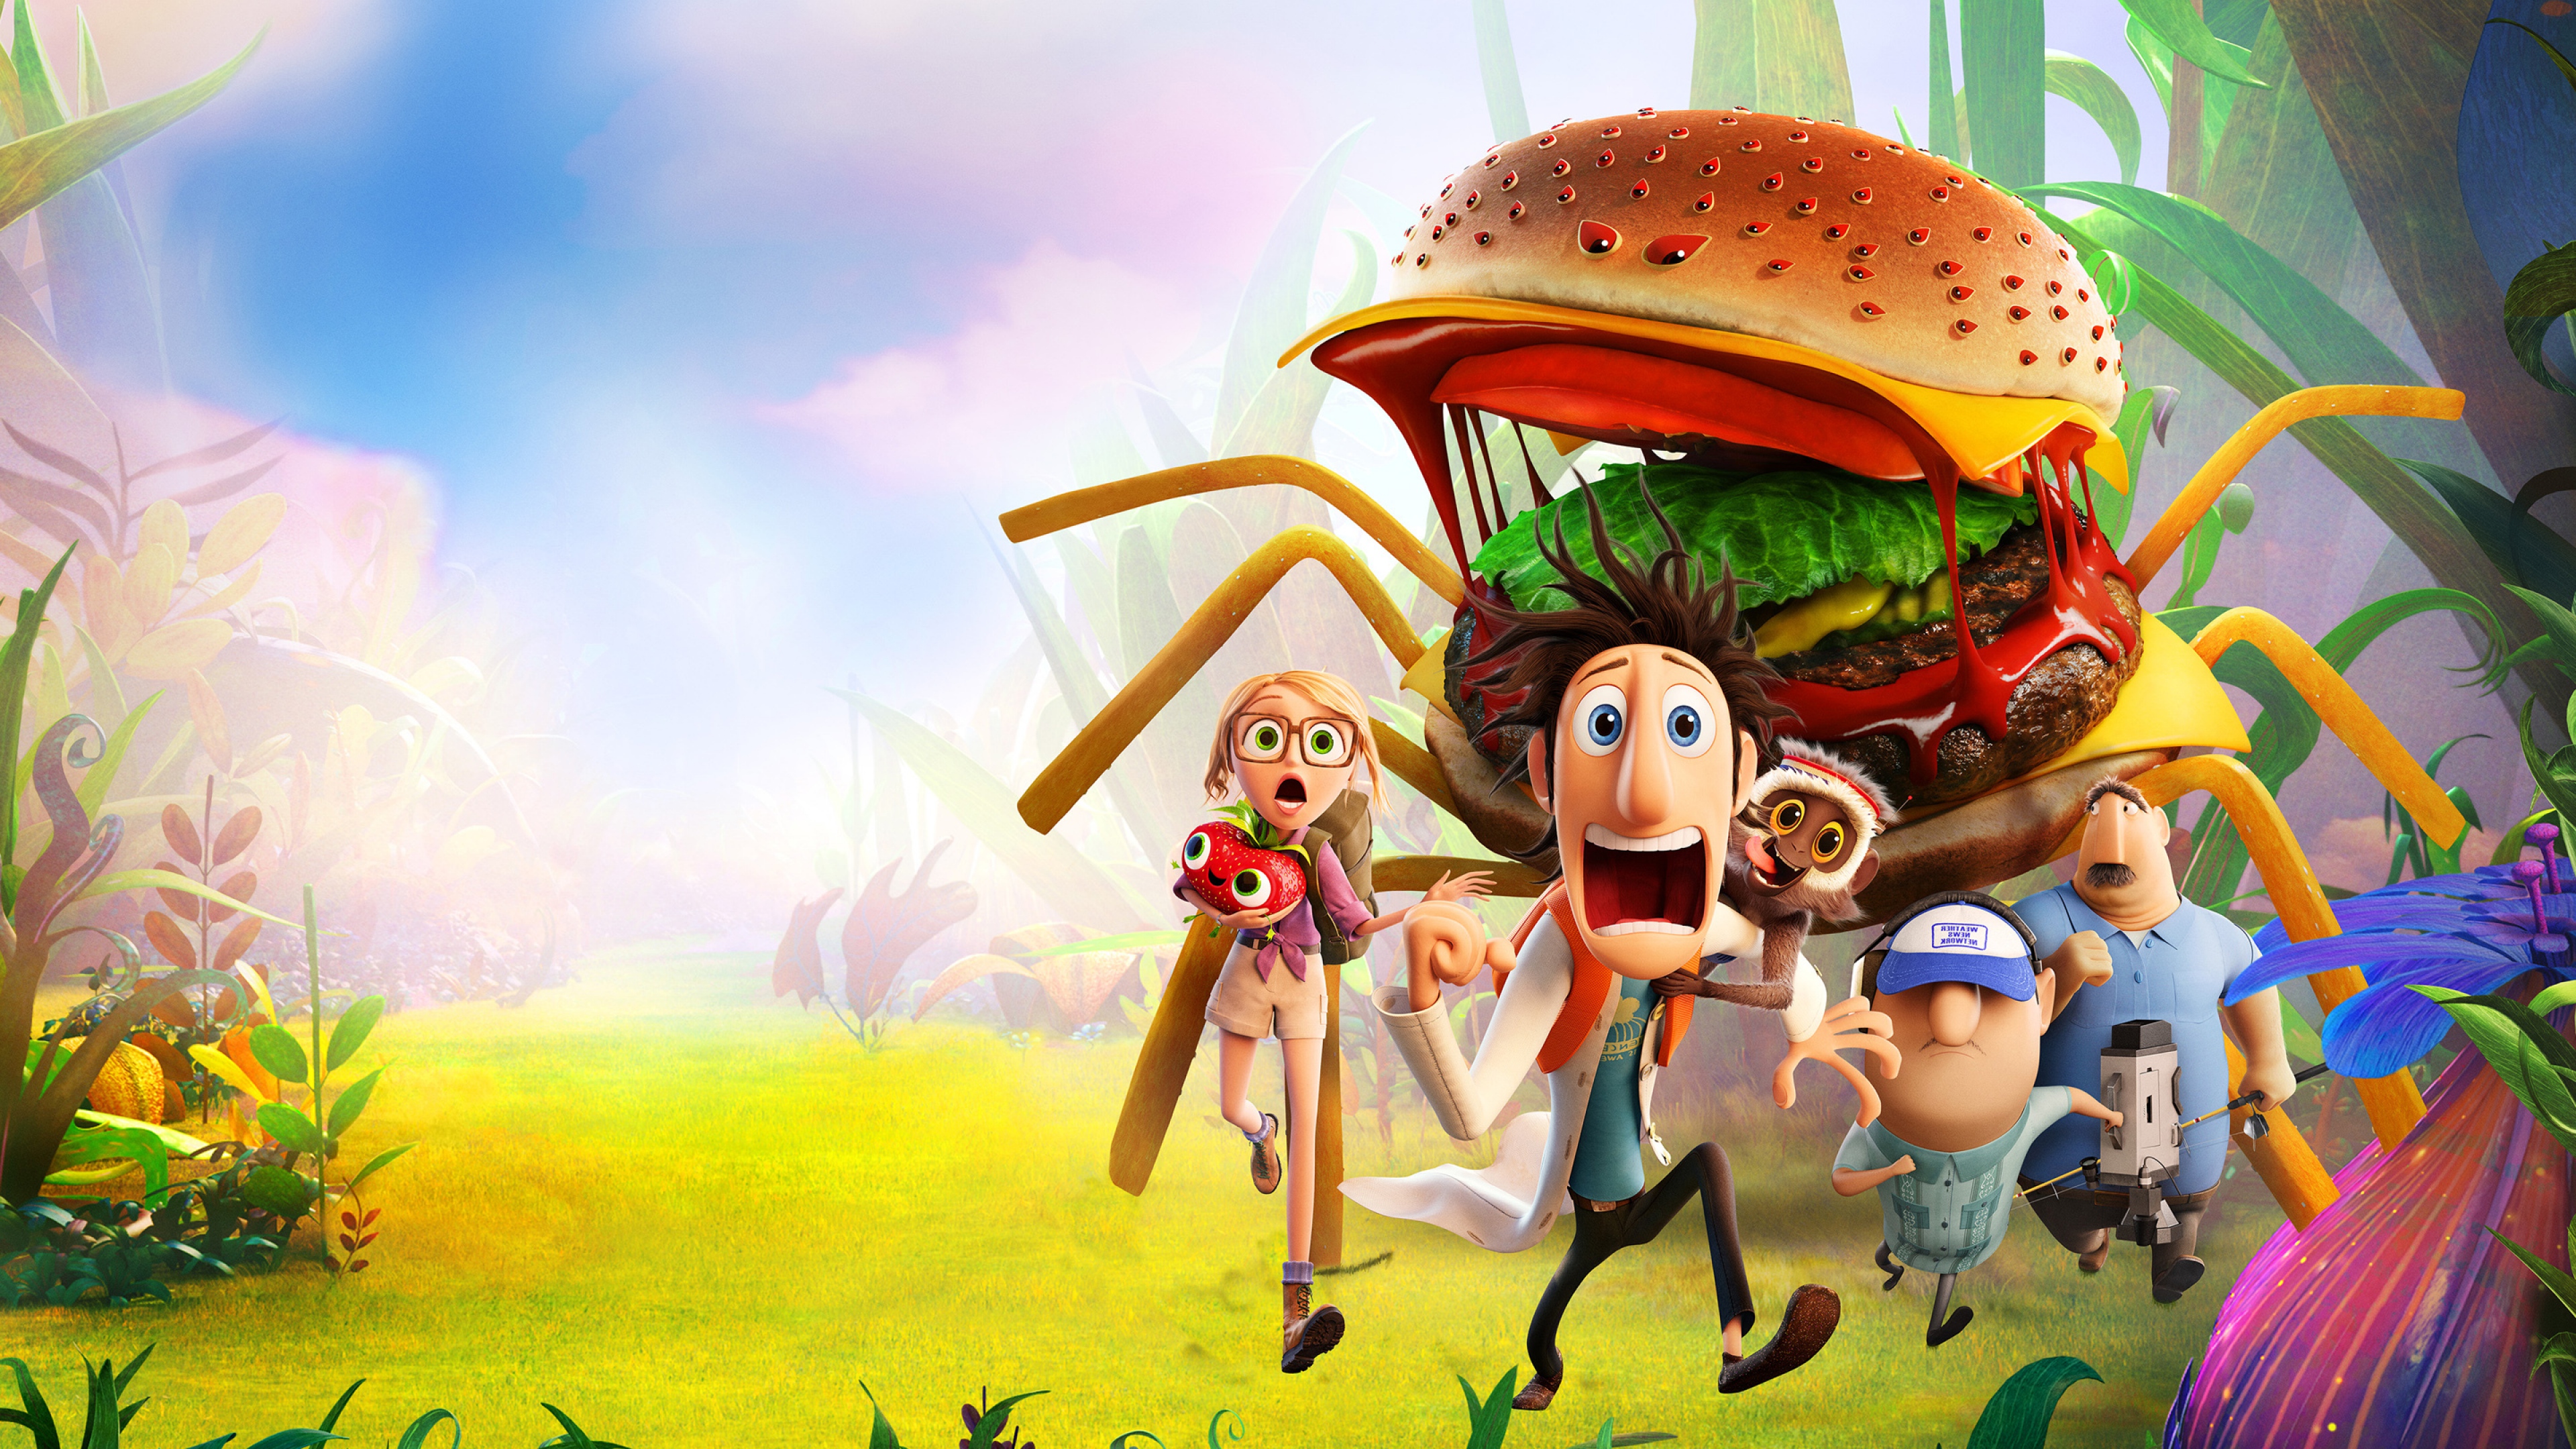 Download Wallpaper 3840x2160 Cloudy with a chance of meatballs 2 ...